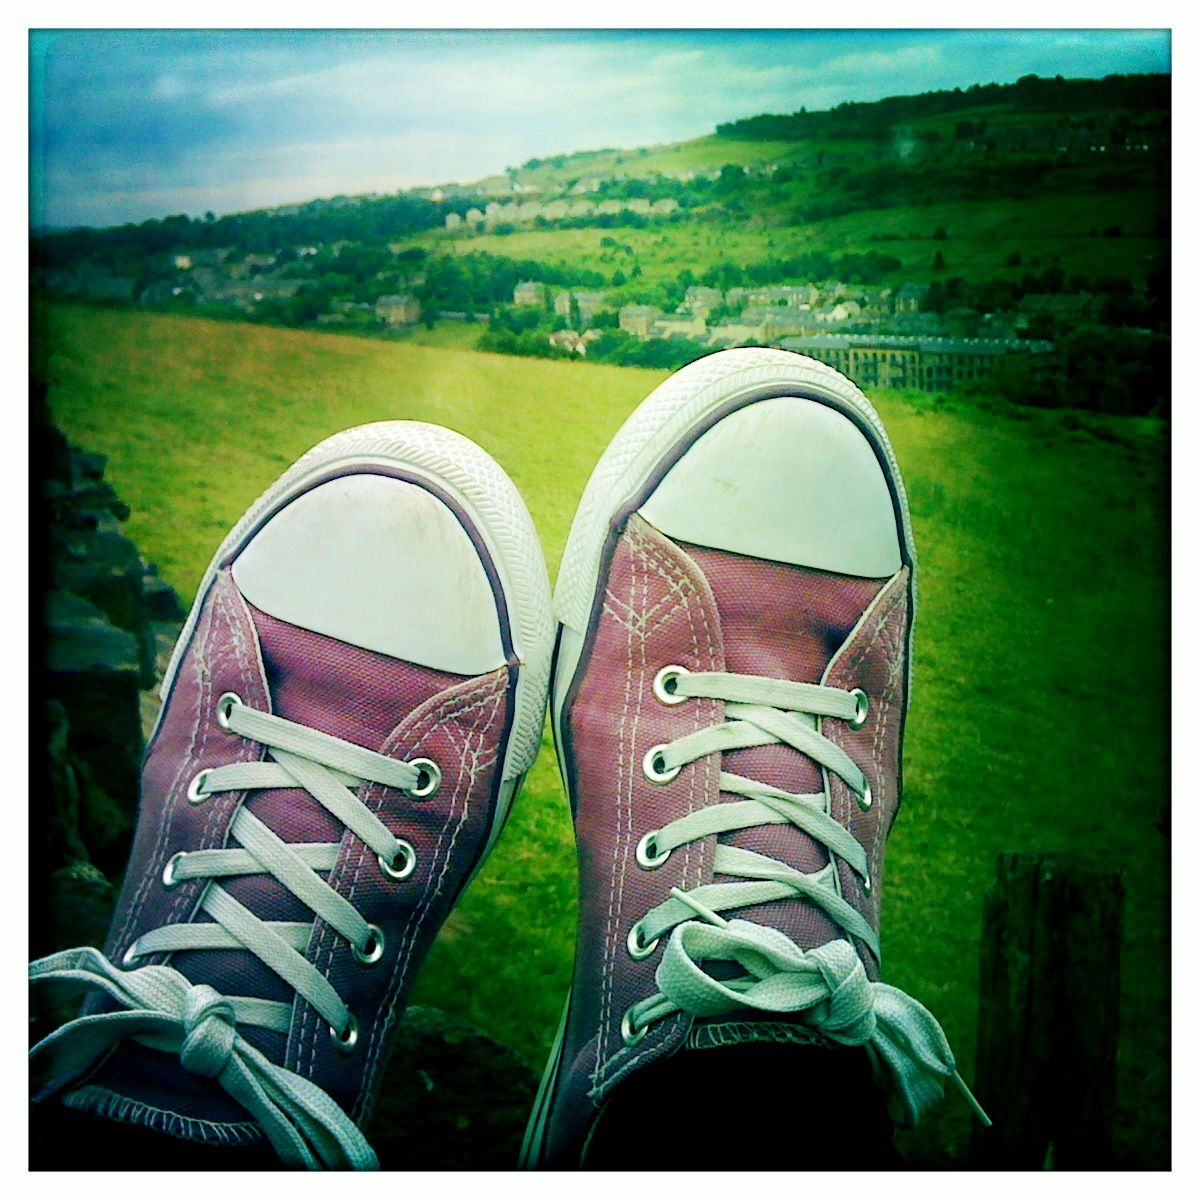 01/07/10 (182/365) shoes with a view